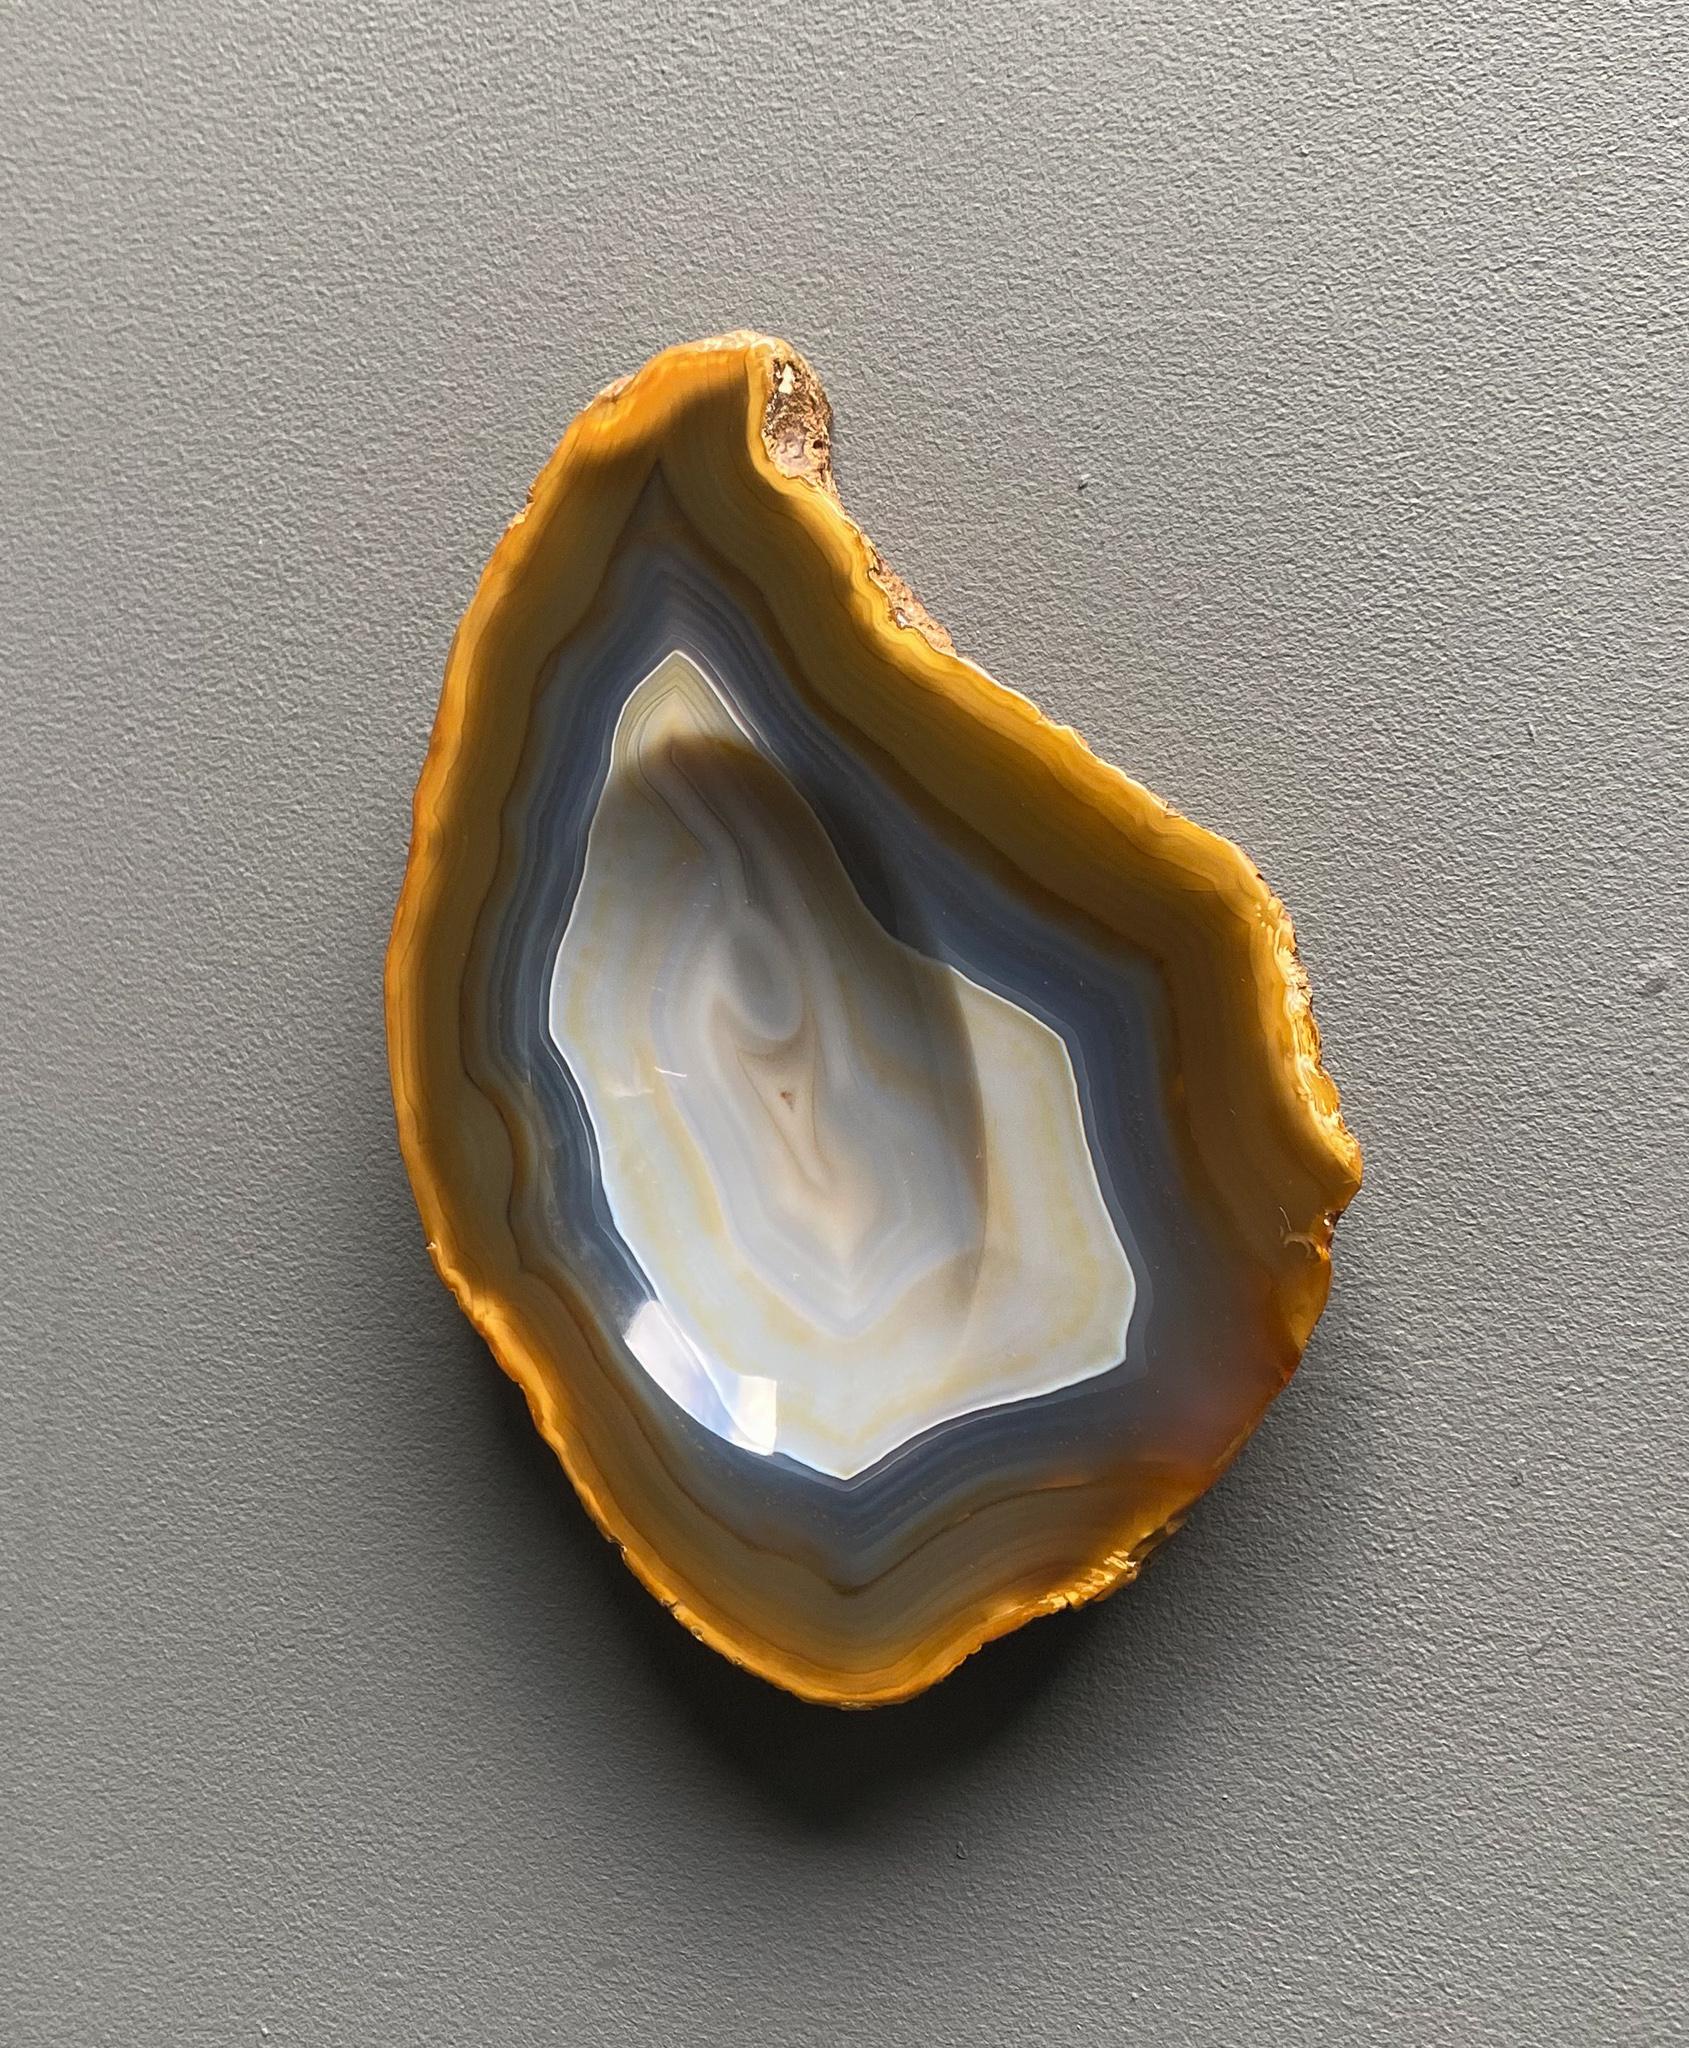 Polished Agate Geode Stone Bowl, circa 1960 For Sale 6